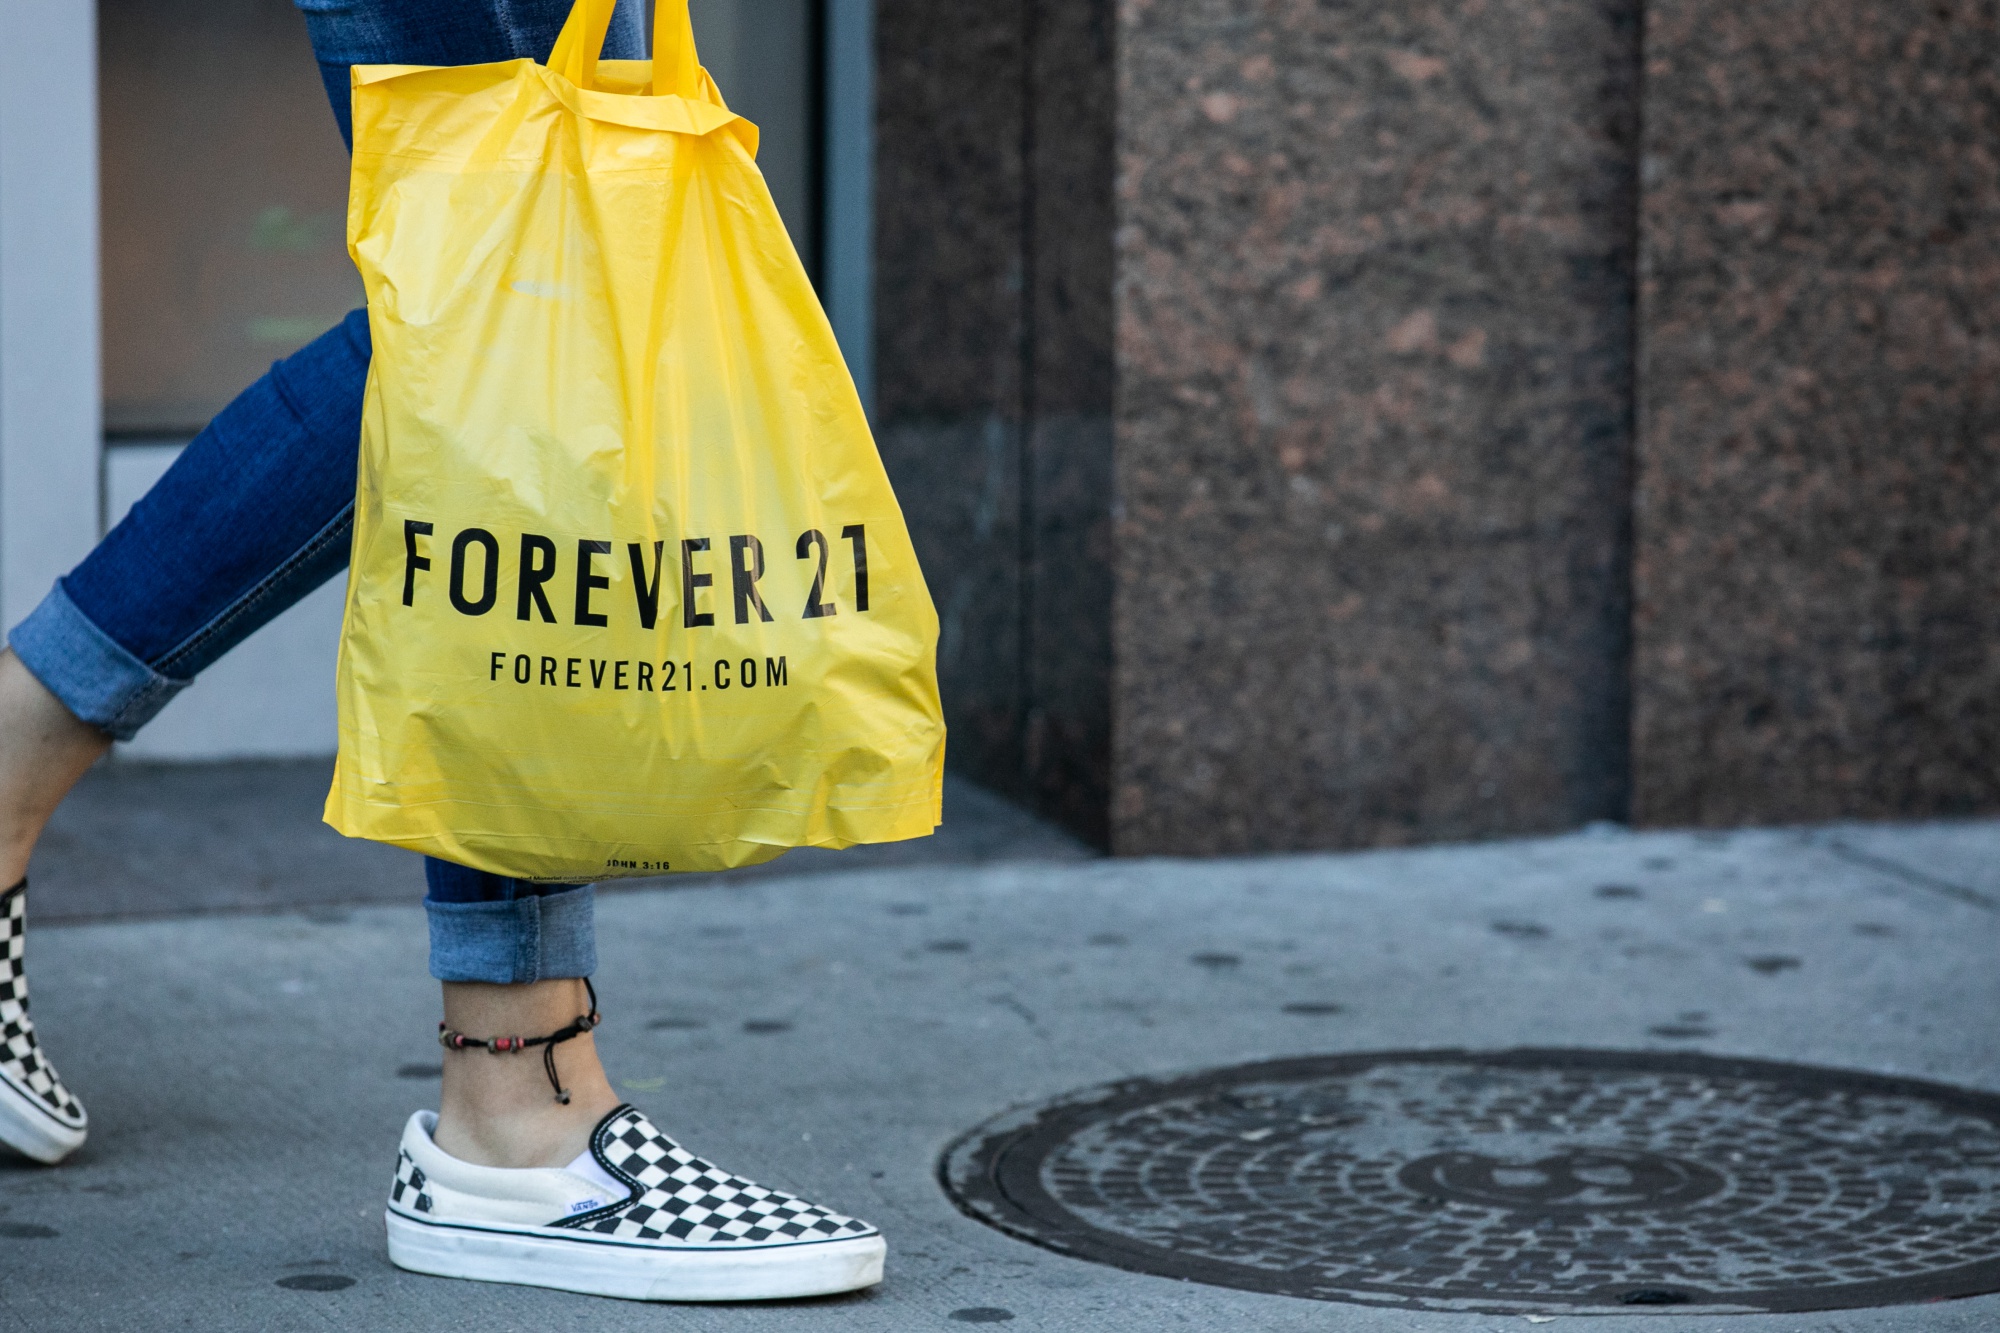 Judge to approve Forever 21 sale that ends founders' control